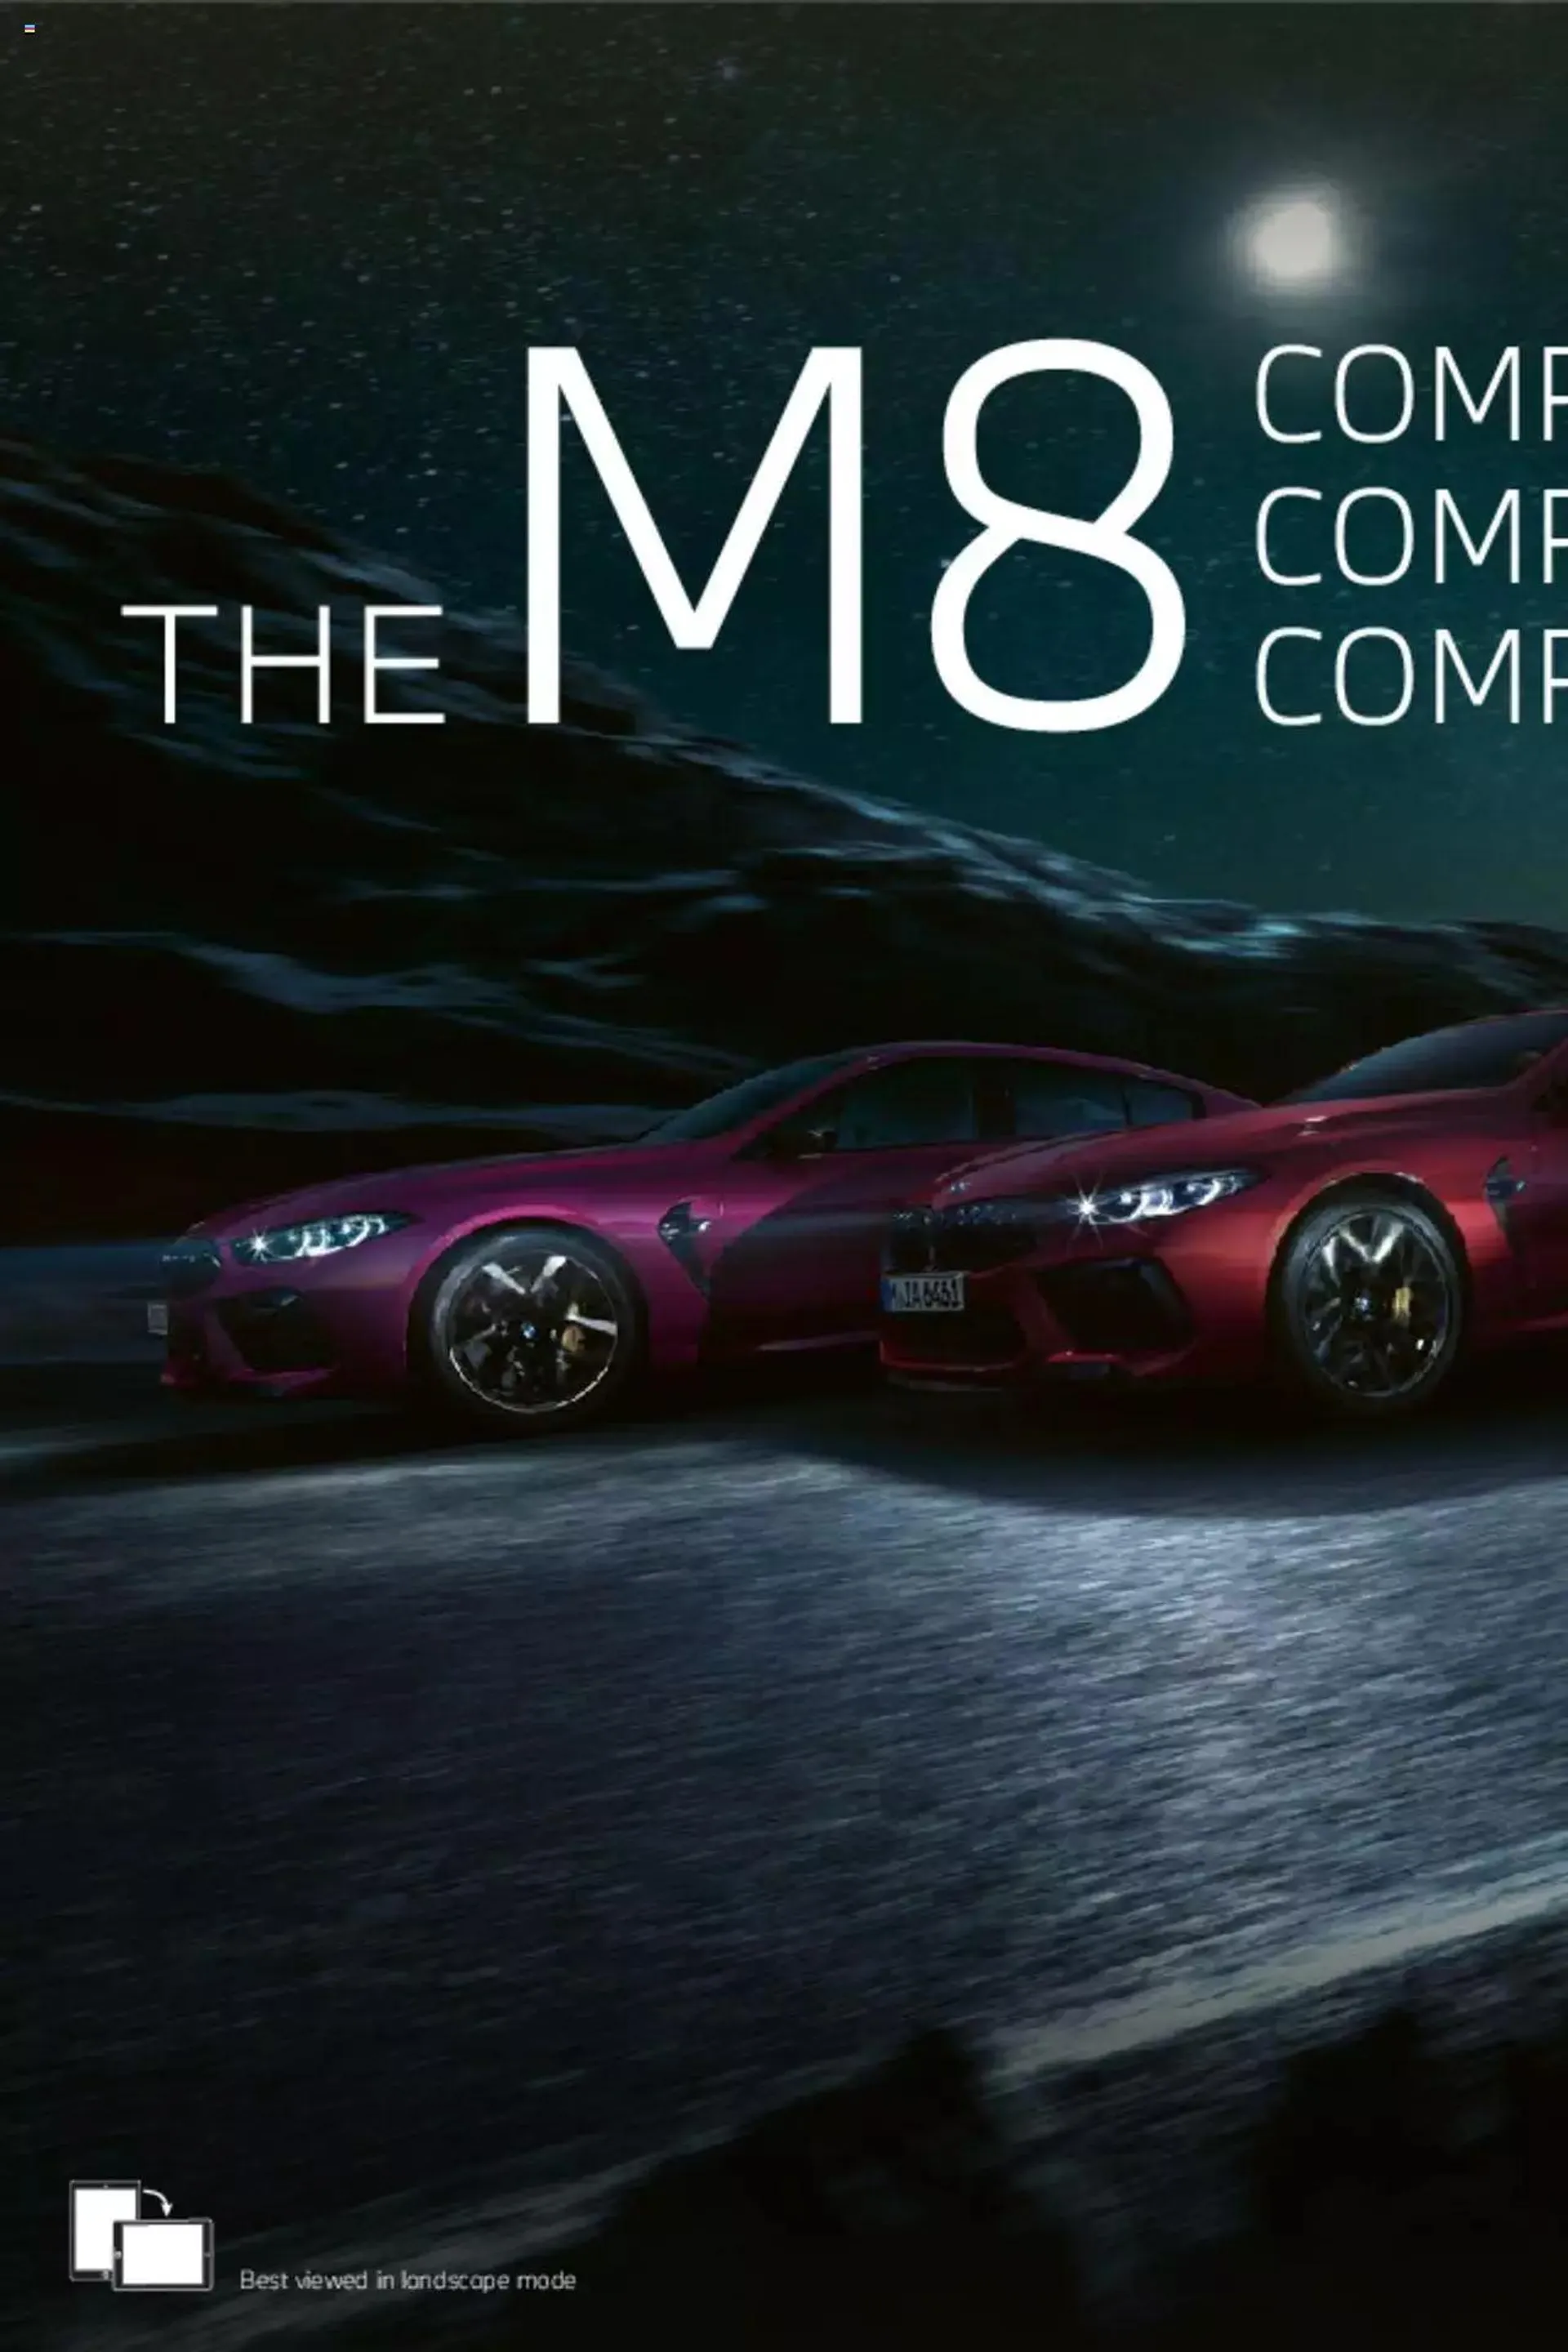 BMW - M8 Coupe, Convertible and Gran Coupe Brochure - 0